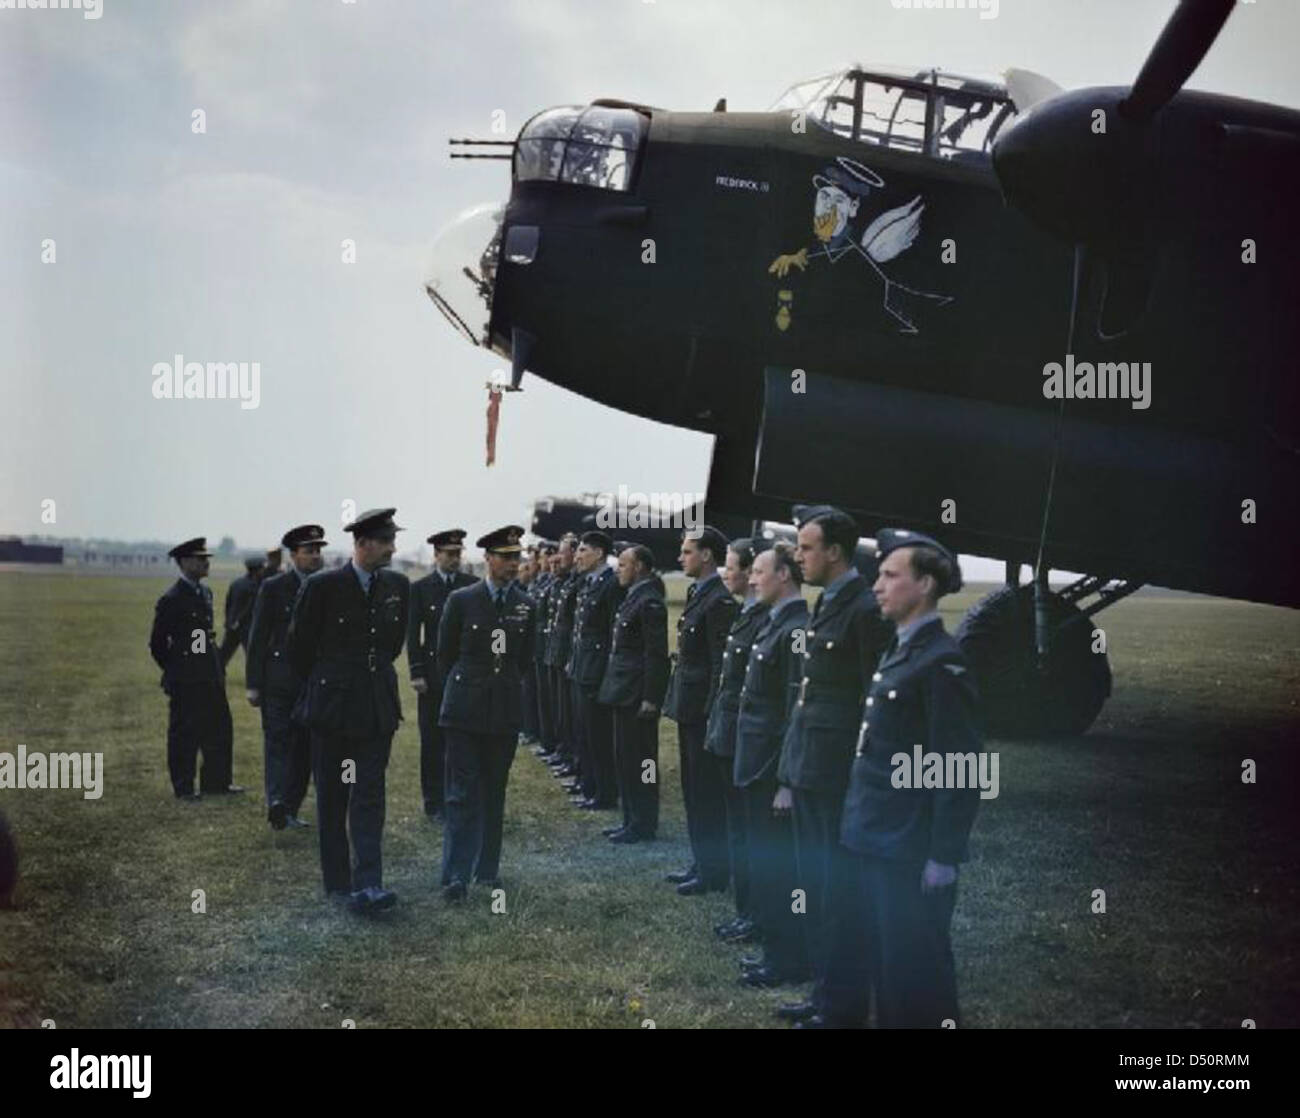 The Visit of Hm King George Vi To No 617 Squadron (the Dambusters), Royal Air Force, Scampton, Lincolnshire, 27 May 1943 Stock Photo